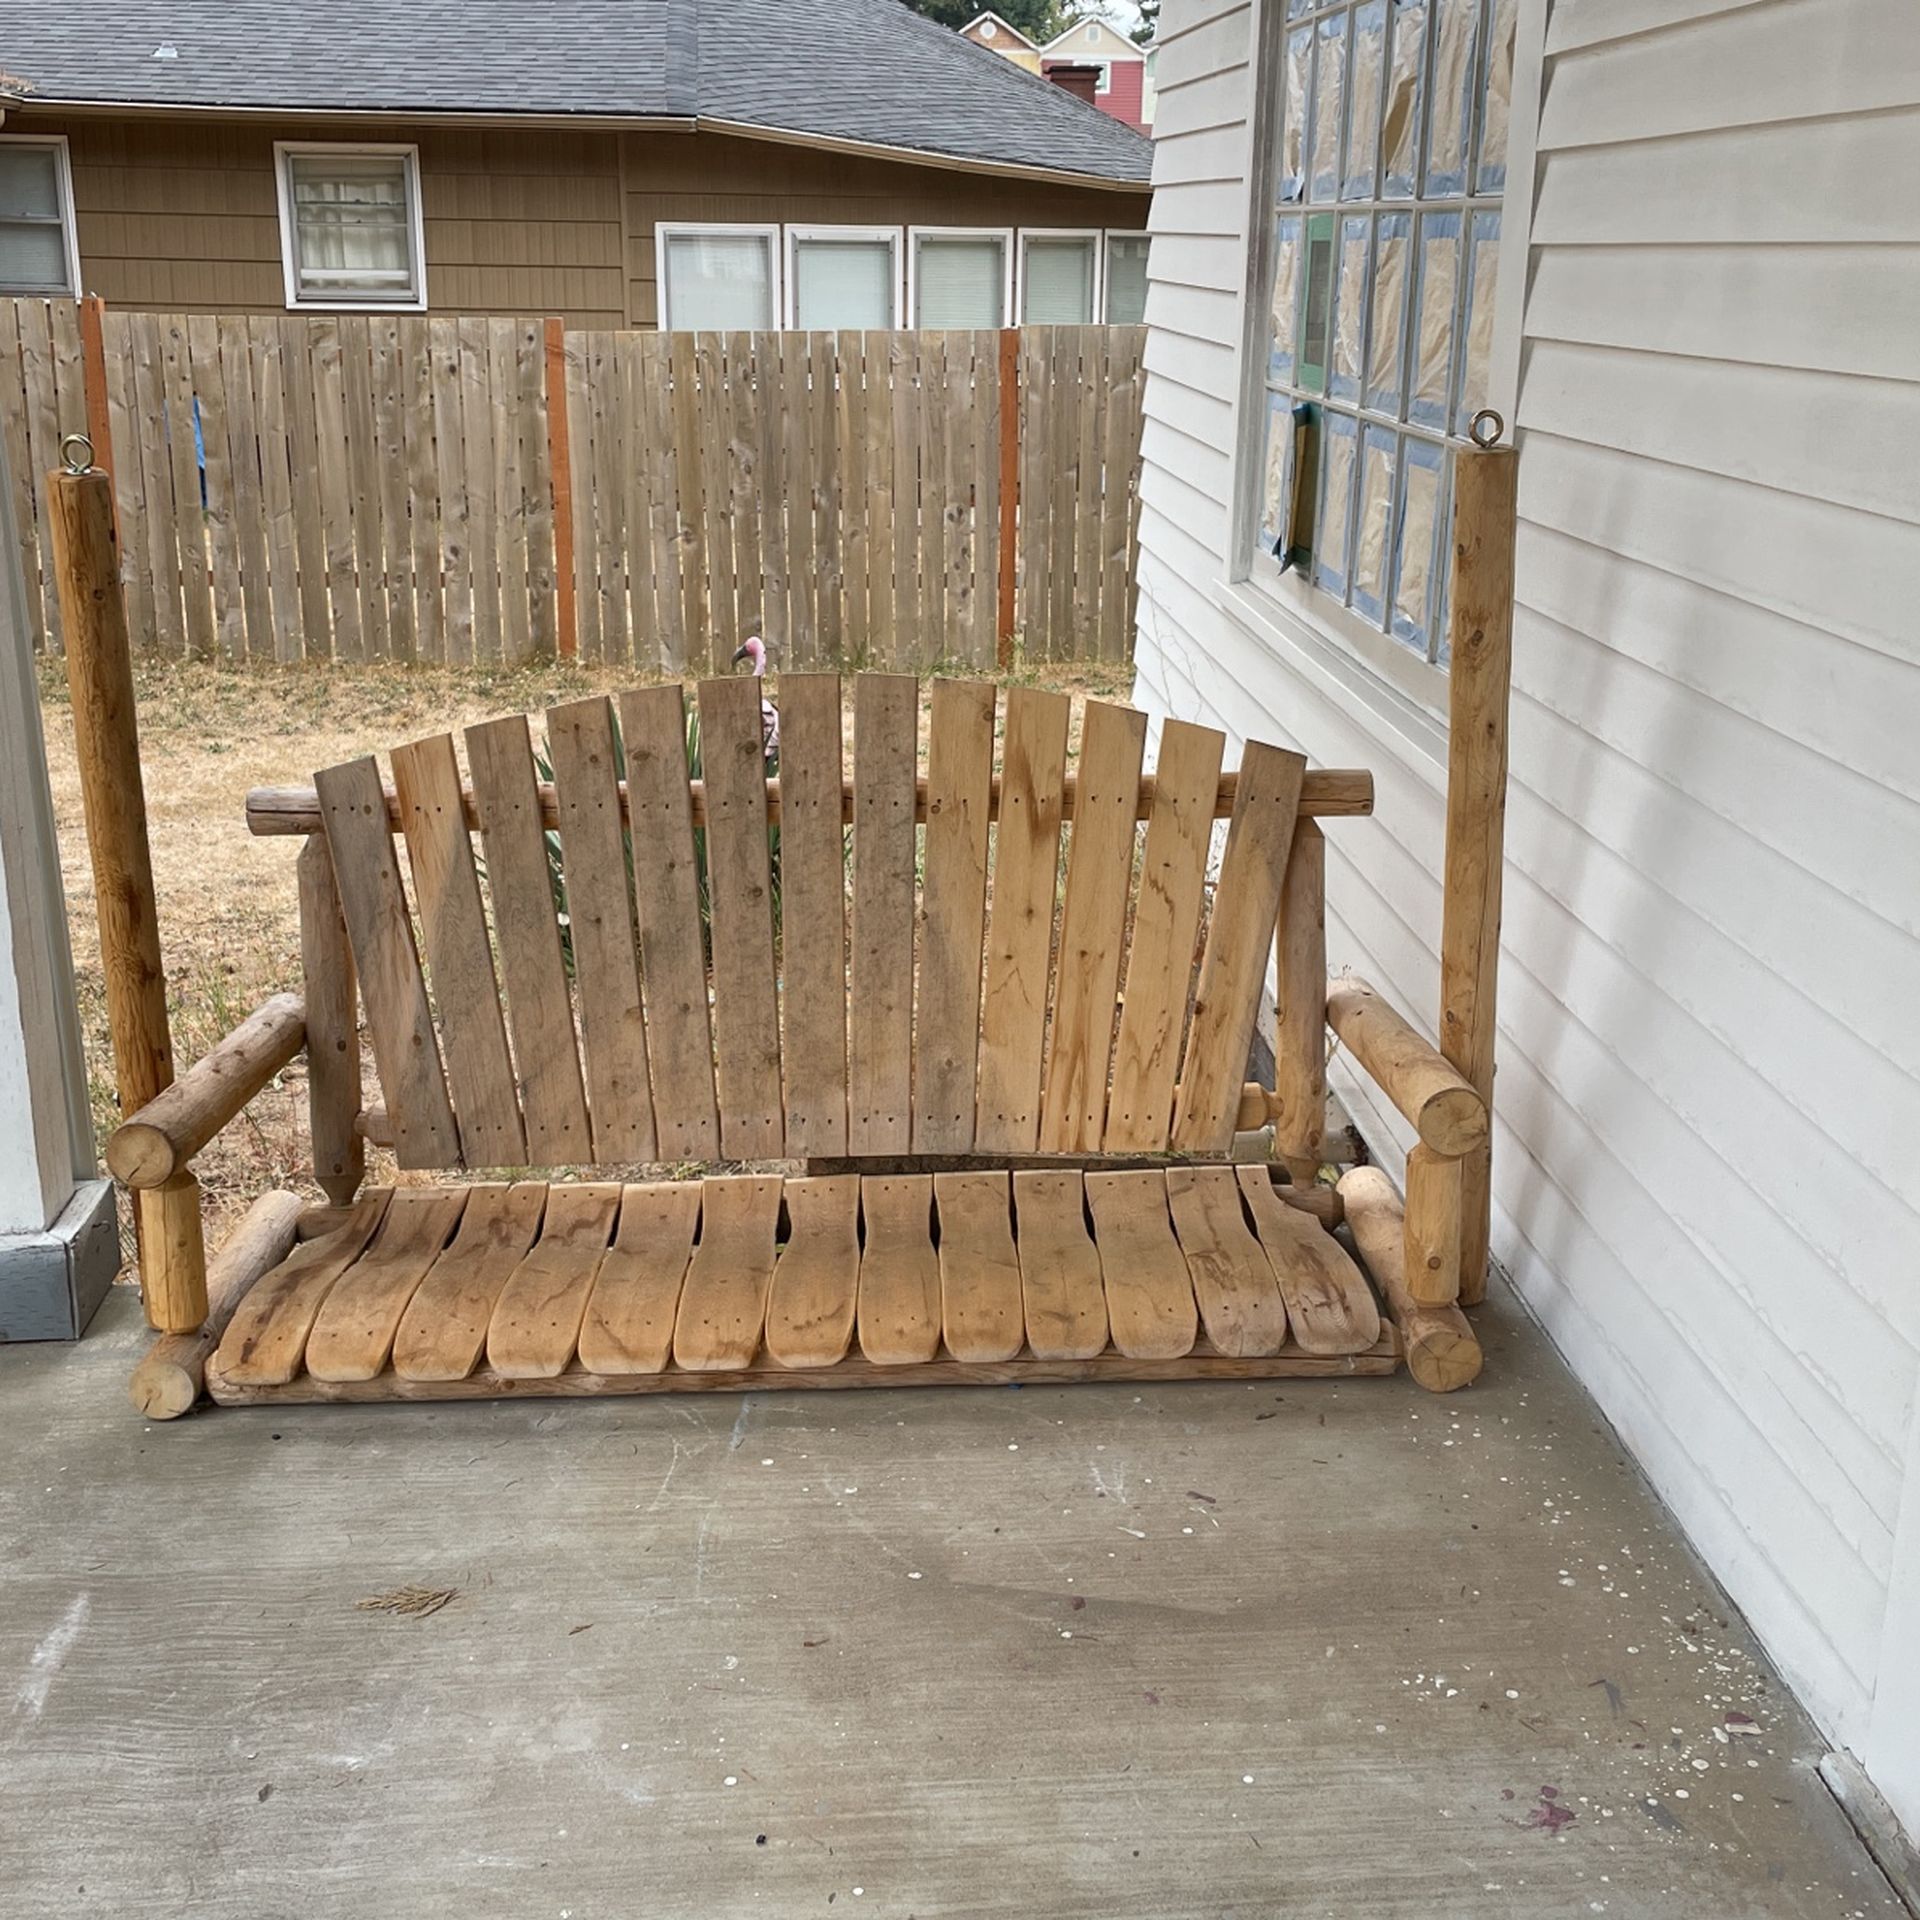 Porch swing Put Together Never Hung Up